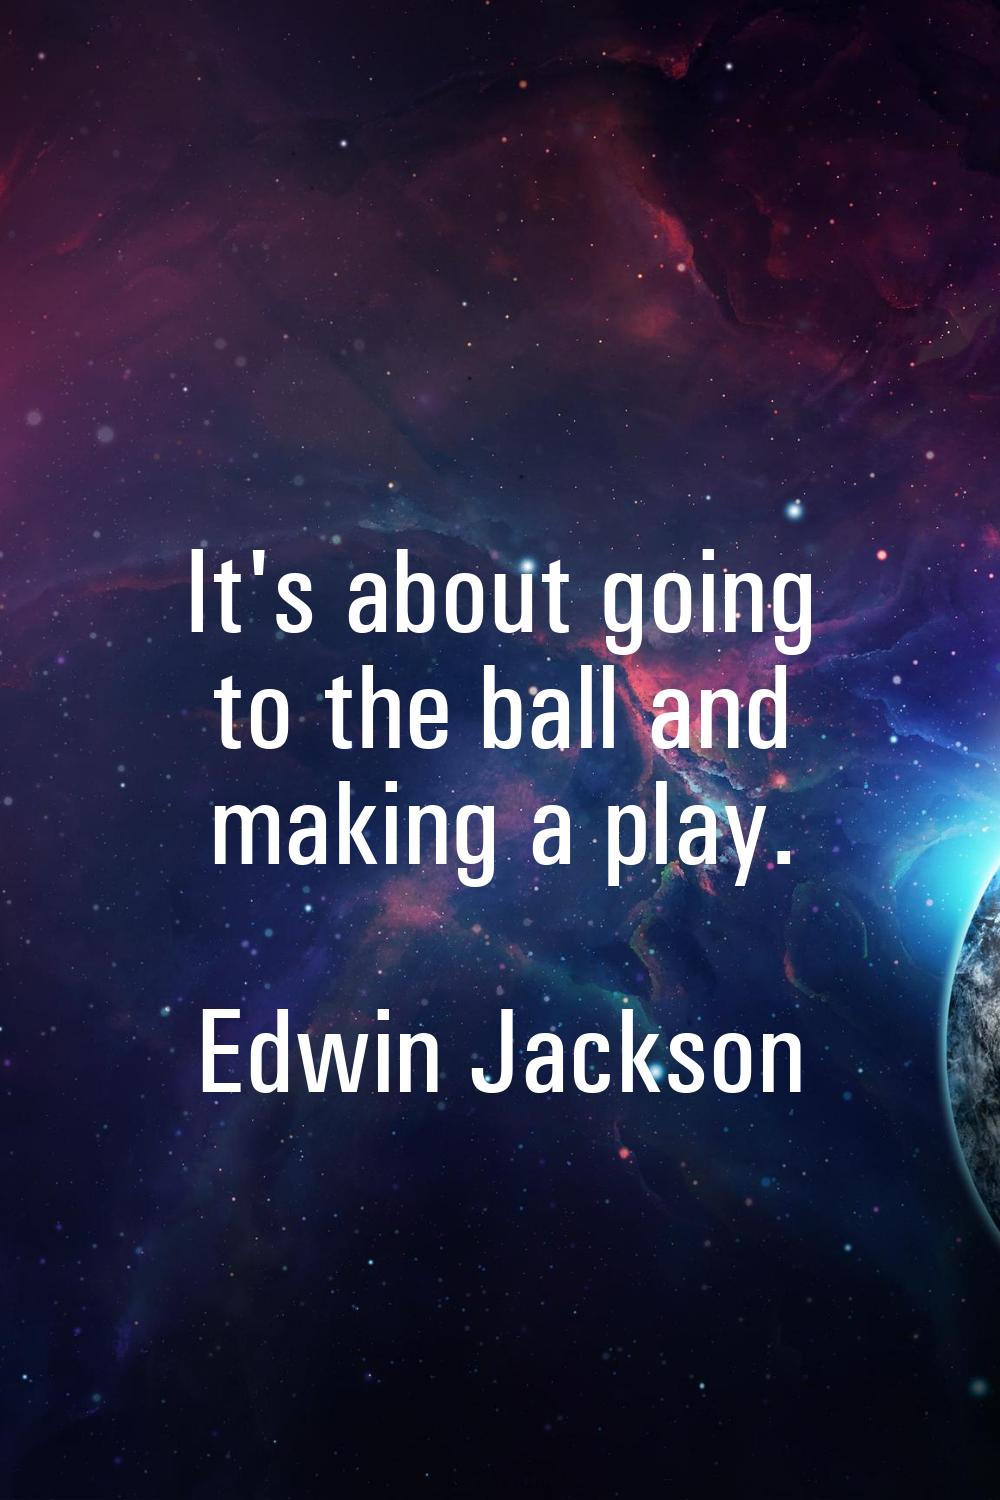 It's about going to the ball and making a play.